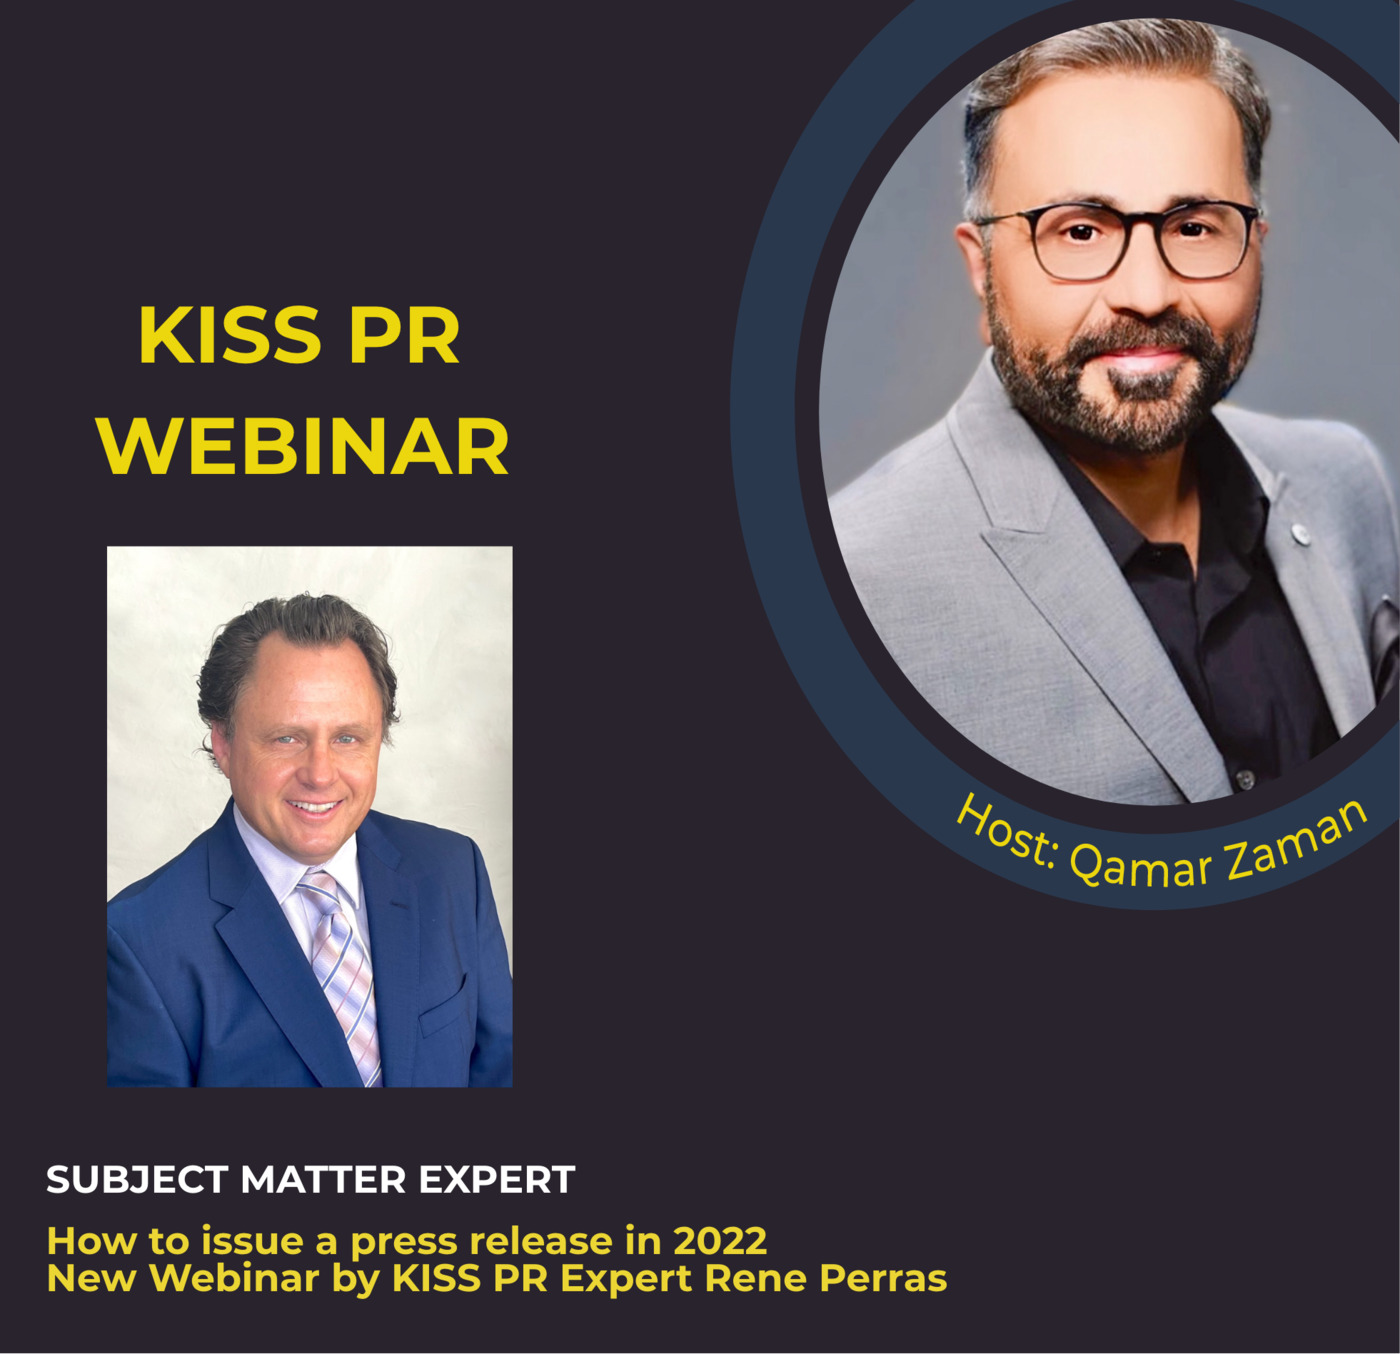 How to issue a press release in 2022 - New Webinar by KISS PR Experts Rene Perras & Qamar Zaman